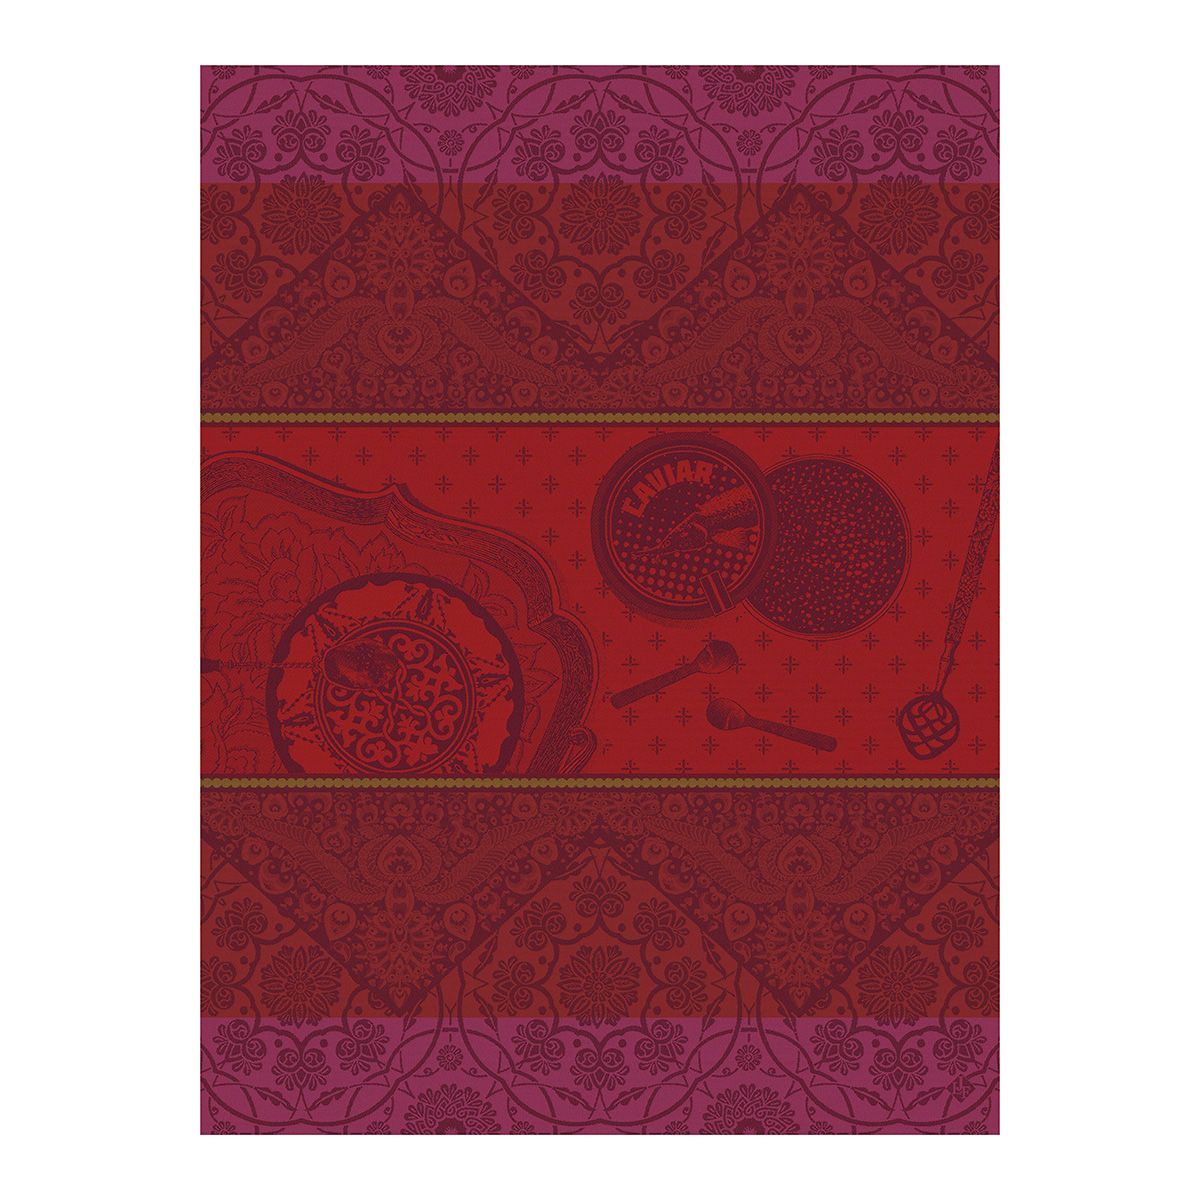 Tsar Red Tea Towels by Le Jacquard Français | Fig Linens and Home